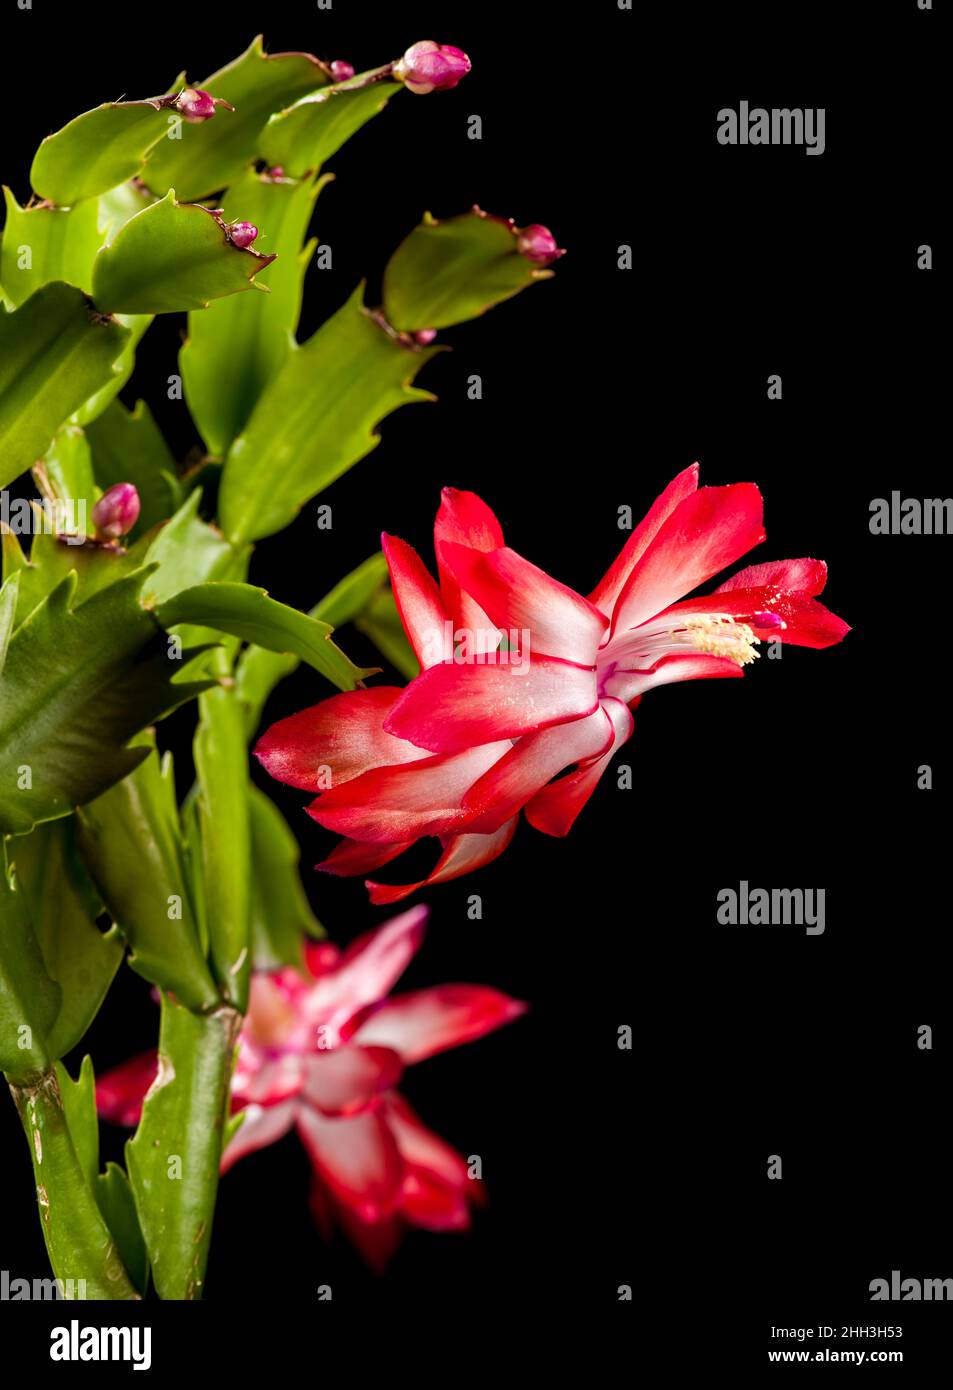 Close-up view of a Christmas cactus (lat: Schlumbergera) flower isolated on black at F11 aperture. Stock Photo